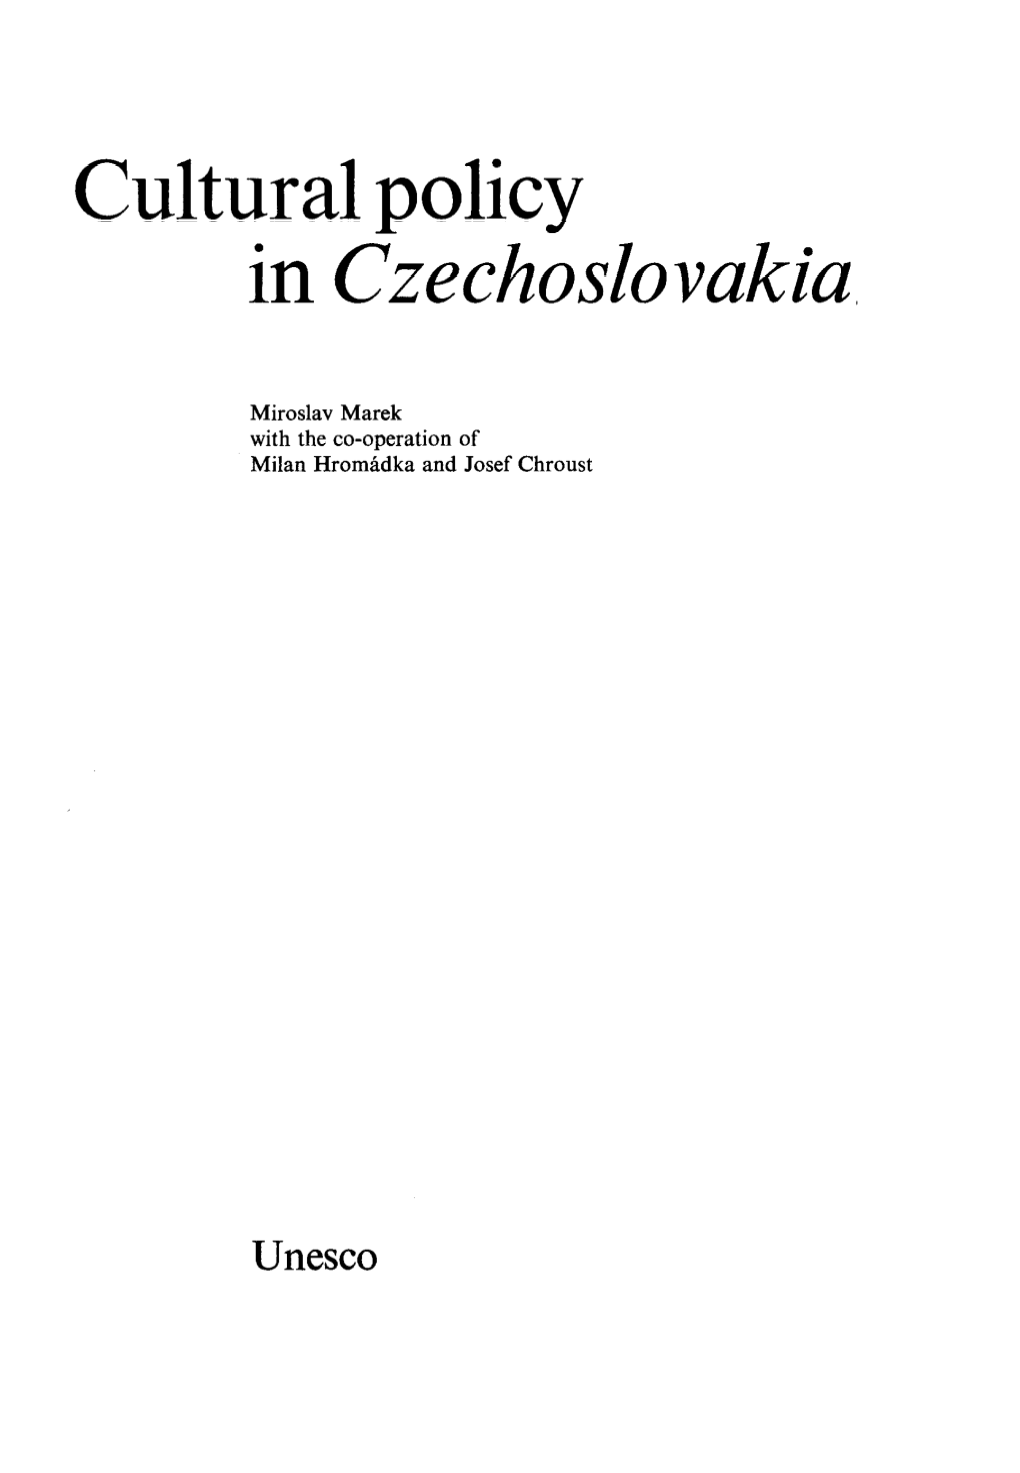 Cultural Policy in Czechoslovakia